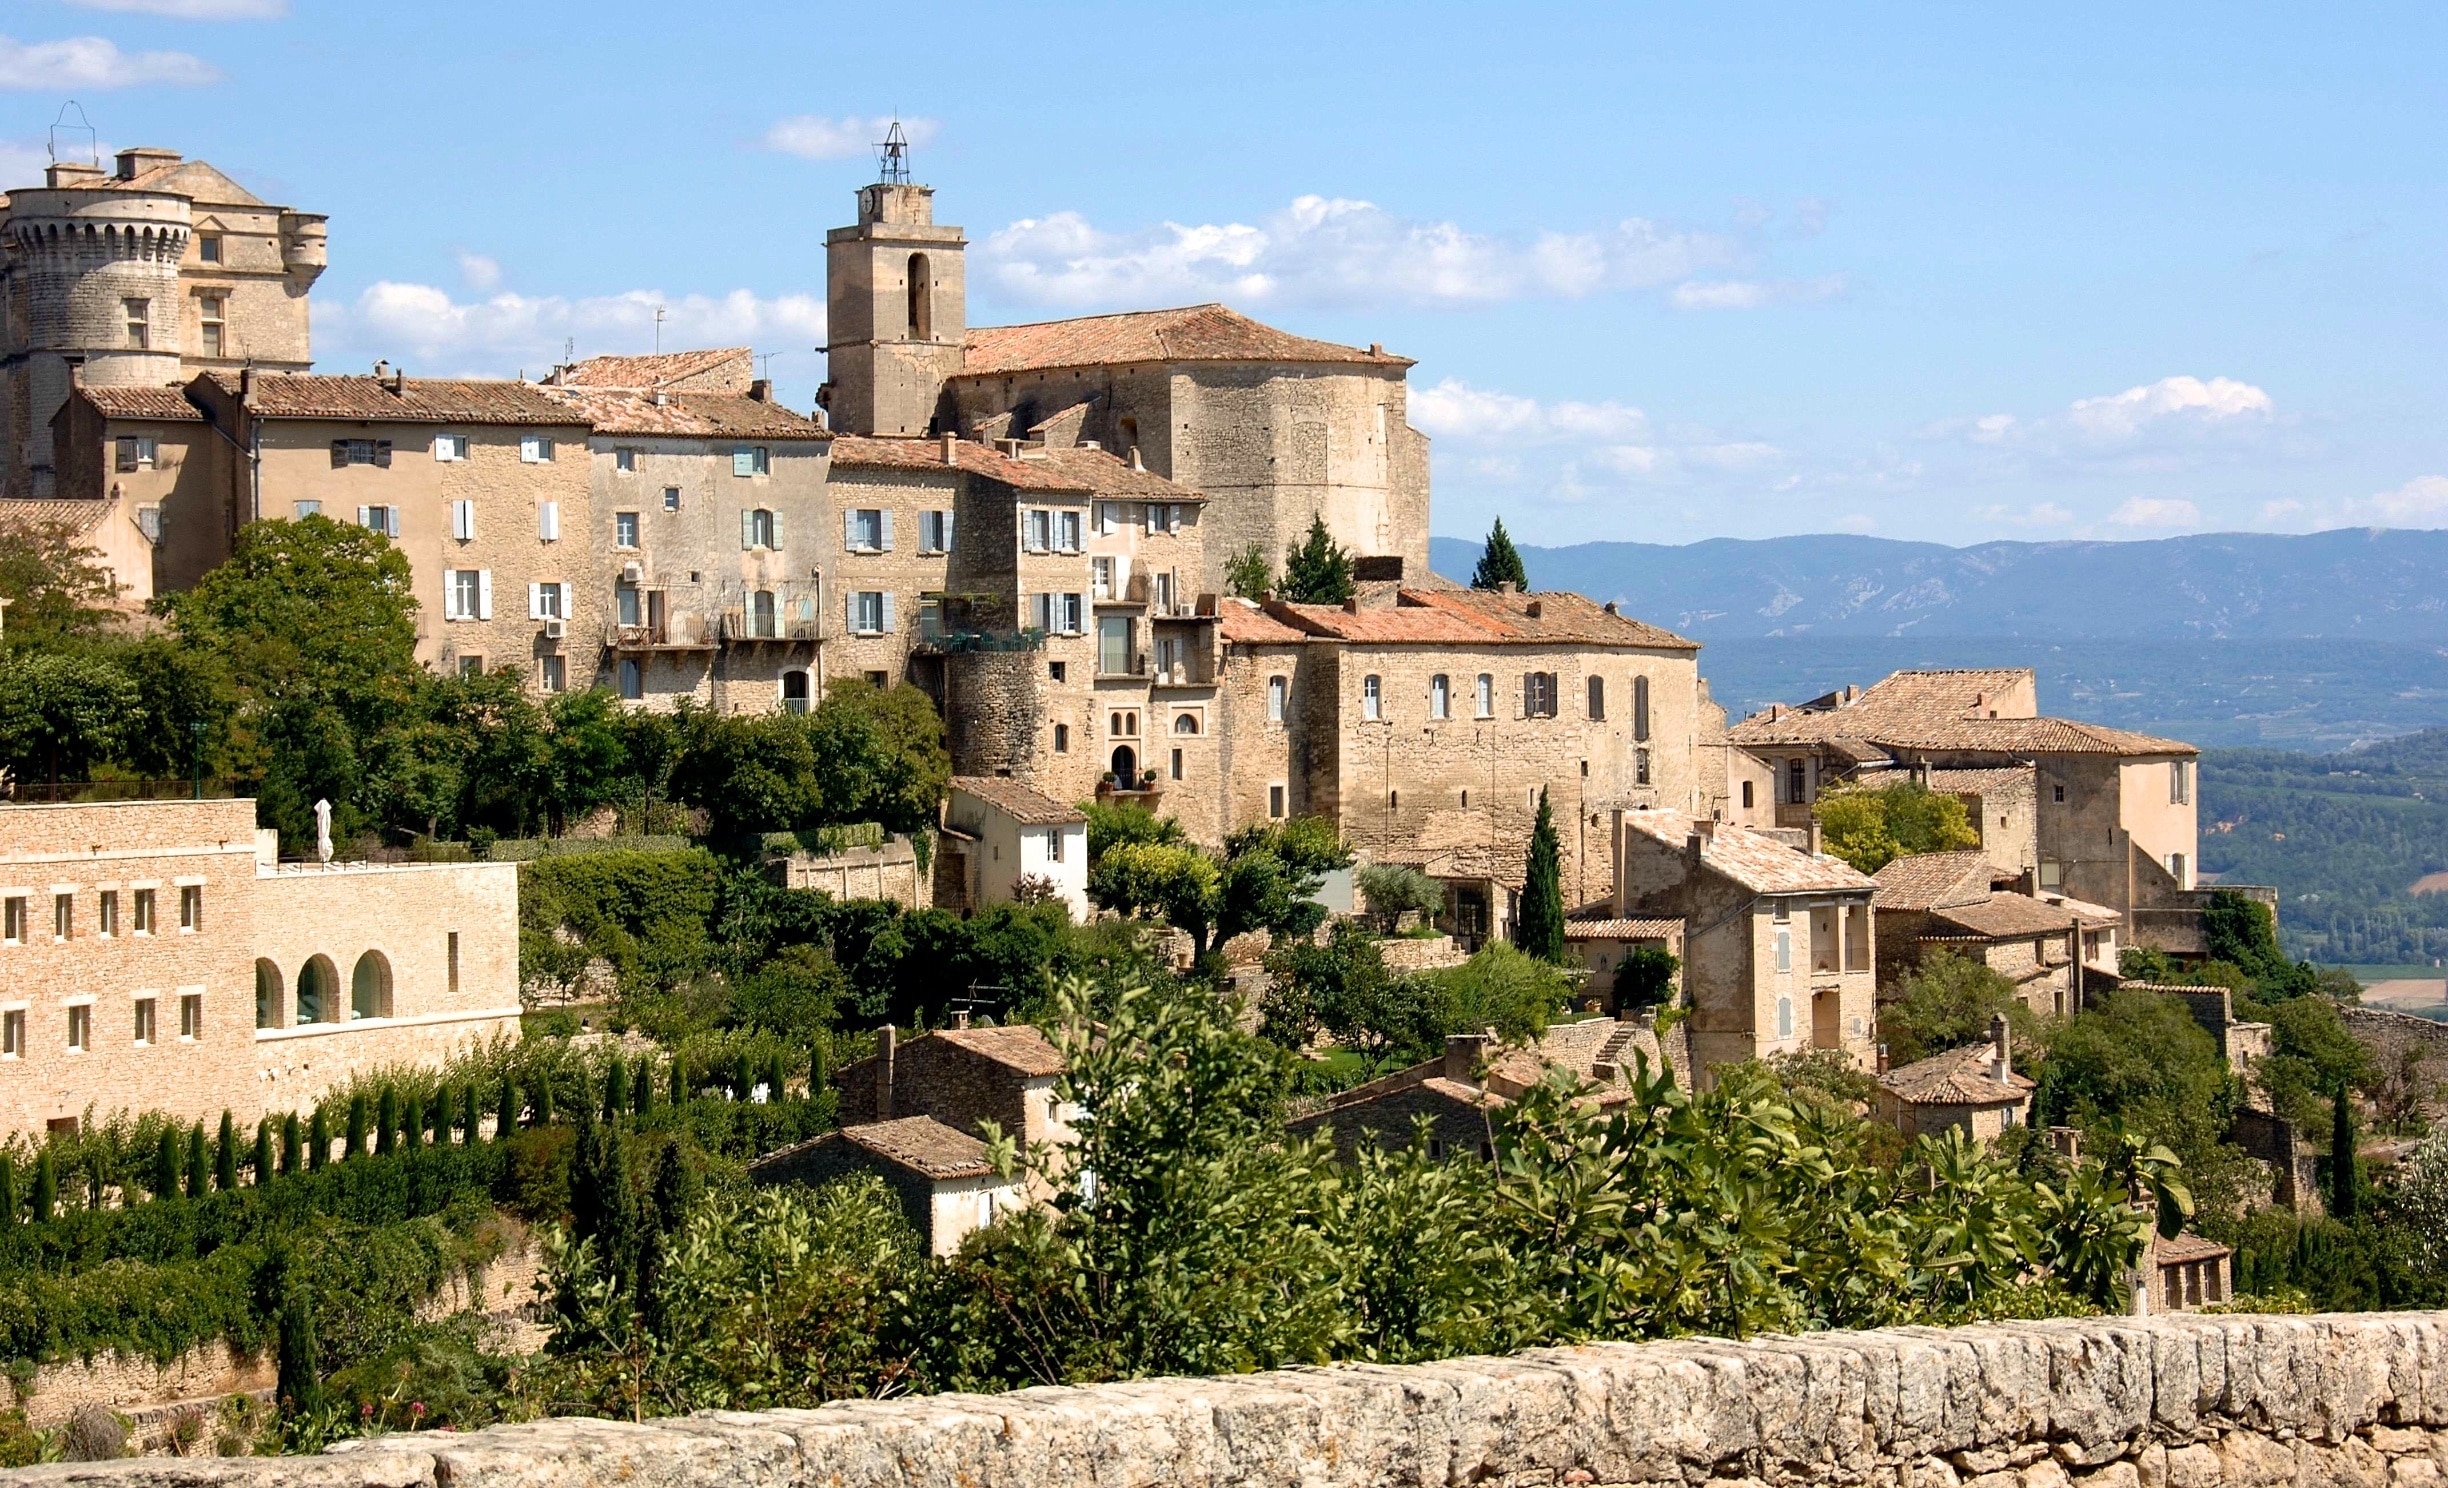 Built on the foothills of the Monts of Vaucluse, facing the Luberon, Gordes is one of the most well-known hilltop villages in the region, and one of the most beautiful in France. Its houses and buildings of white stone root themselves into the sharp cliff of the mountain, its labyrthinth of "calades" (narrow cobblestone streets) do not leave the visitor indifferent to its charms.